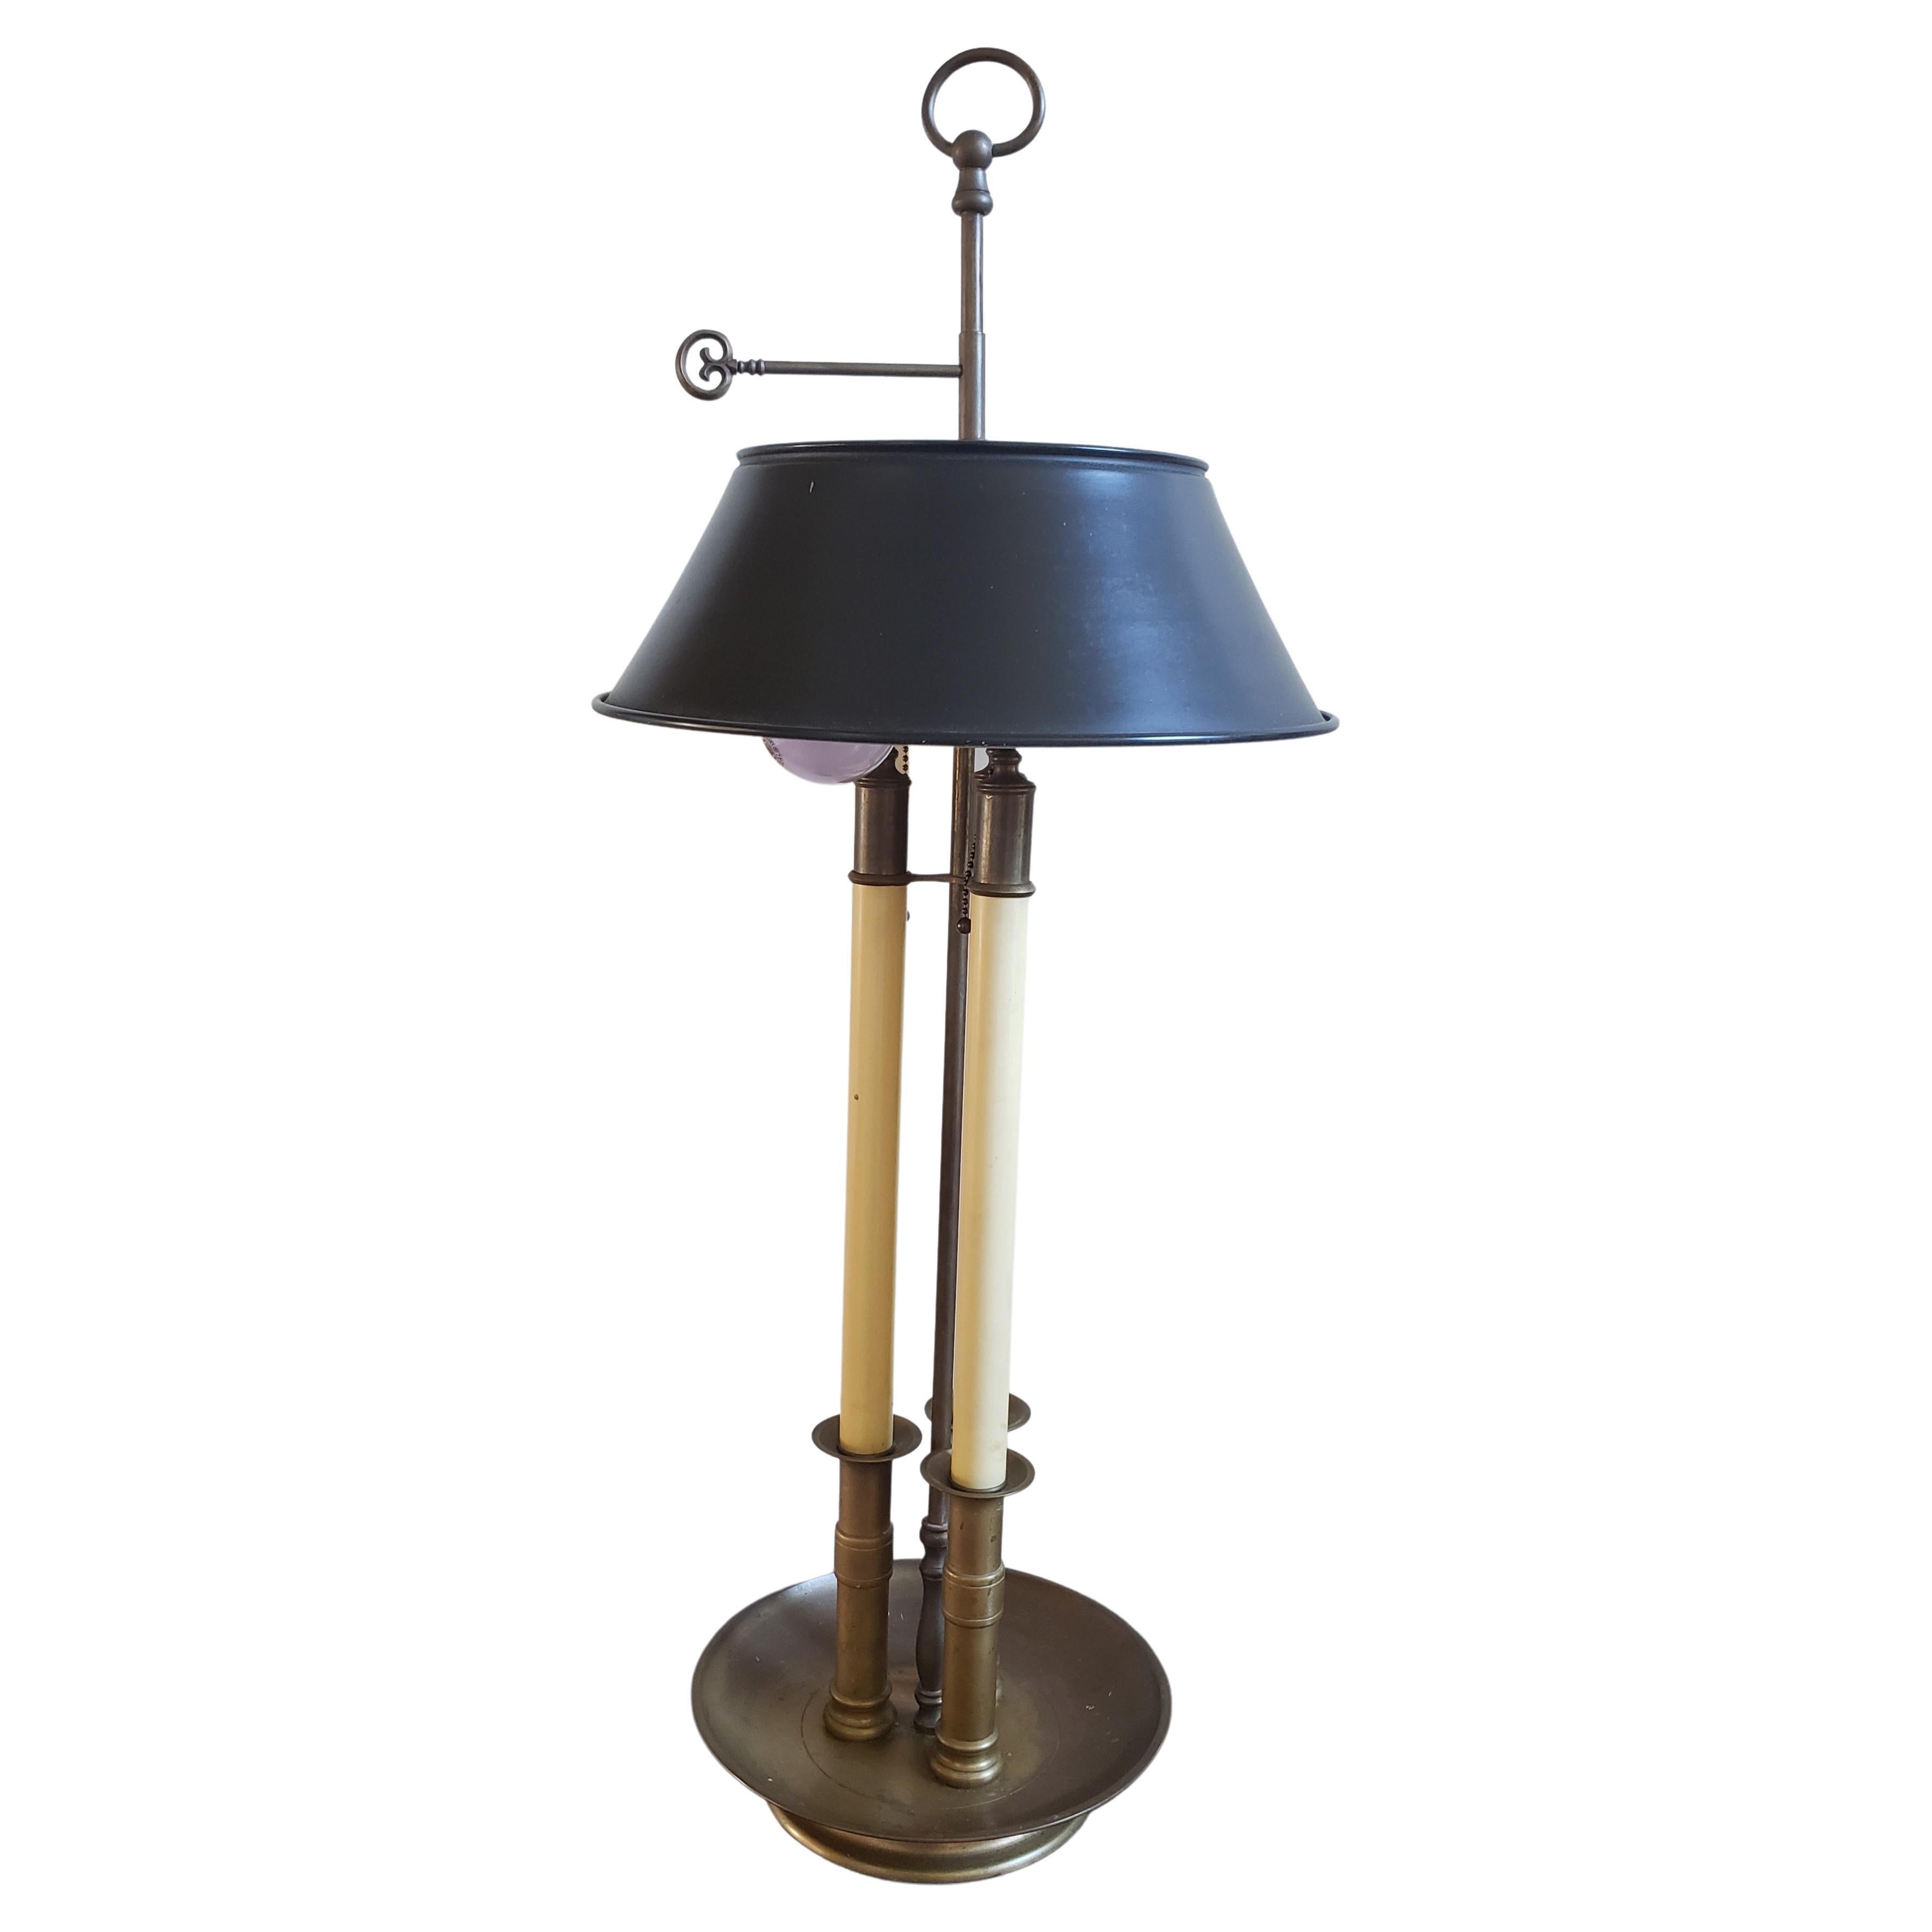 1972 Chapman Patinated Metal Bouillotte Lamp with Tole Shade For Sale